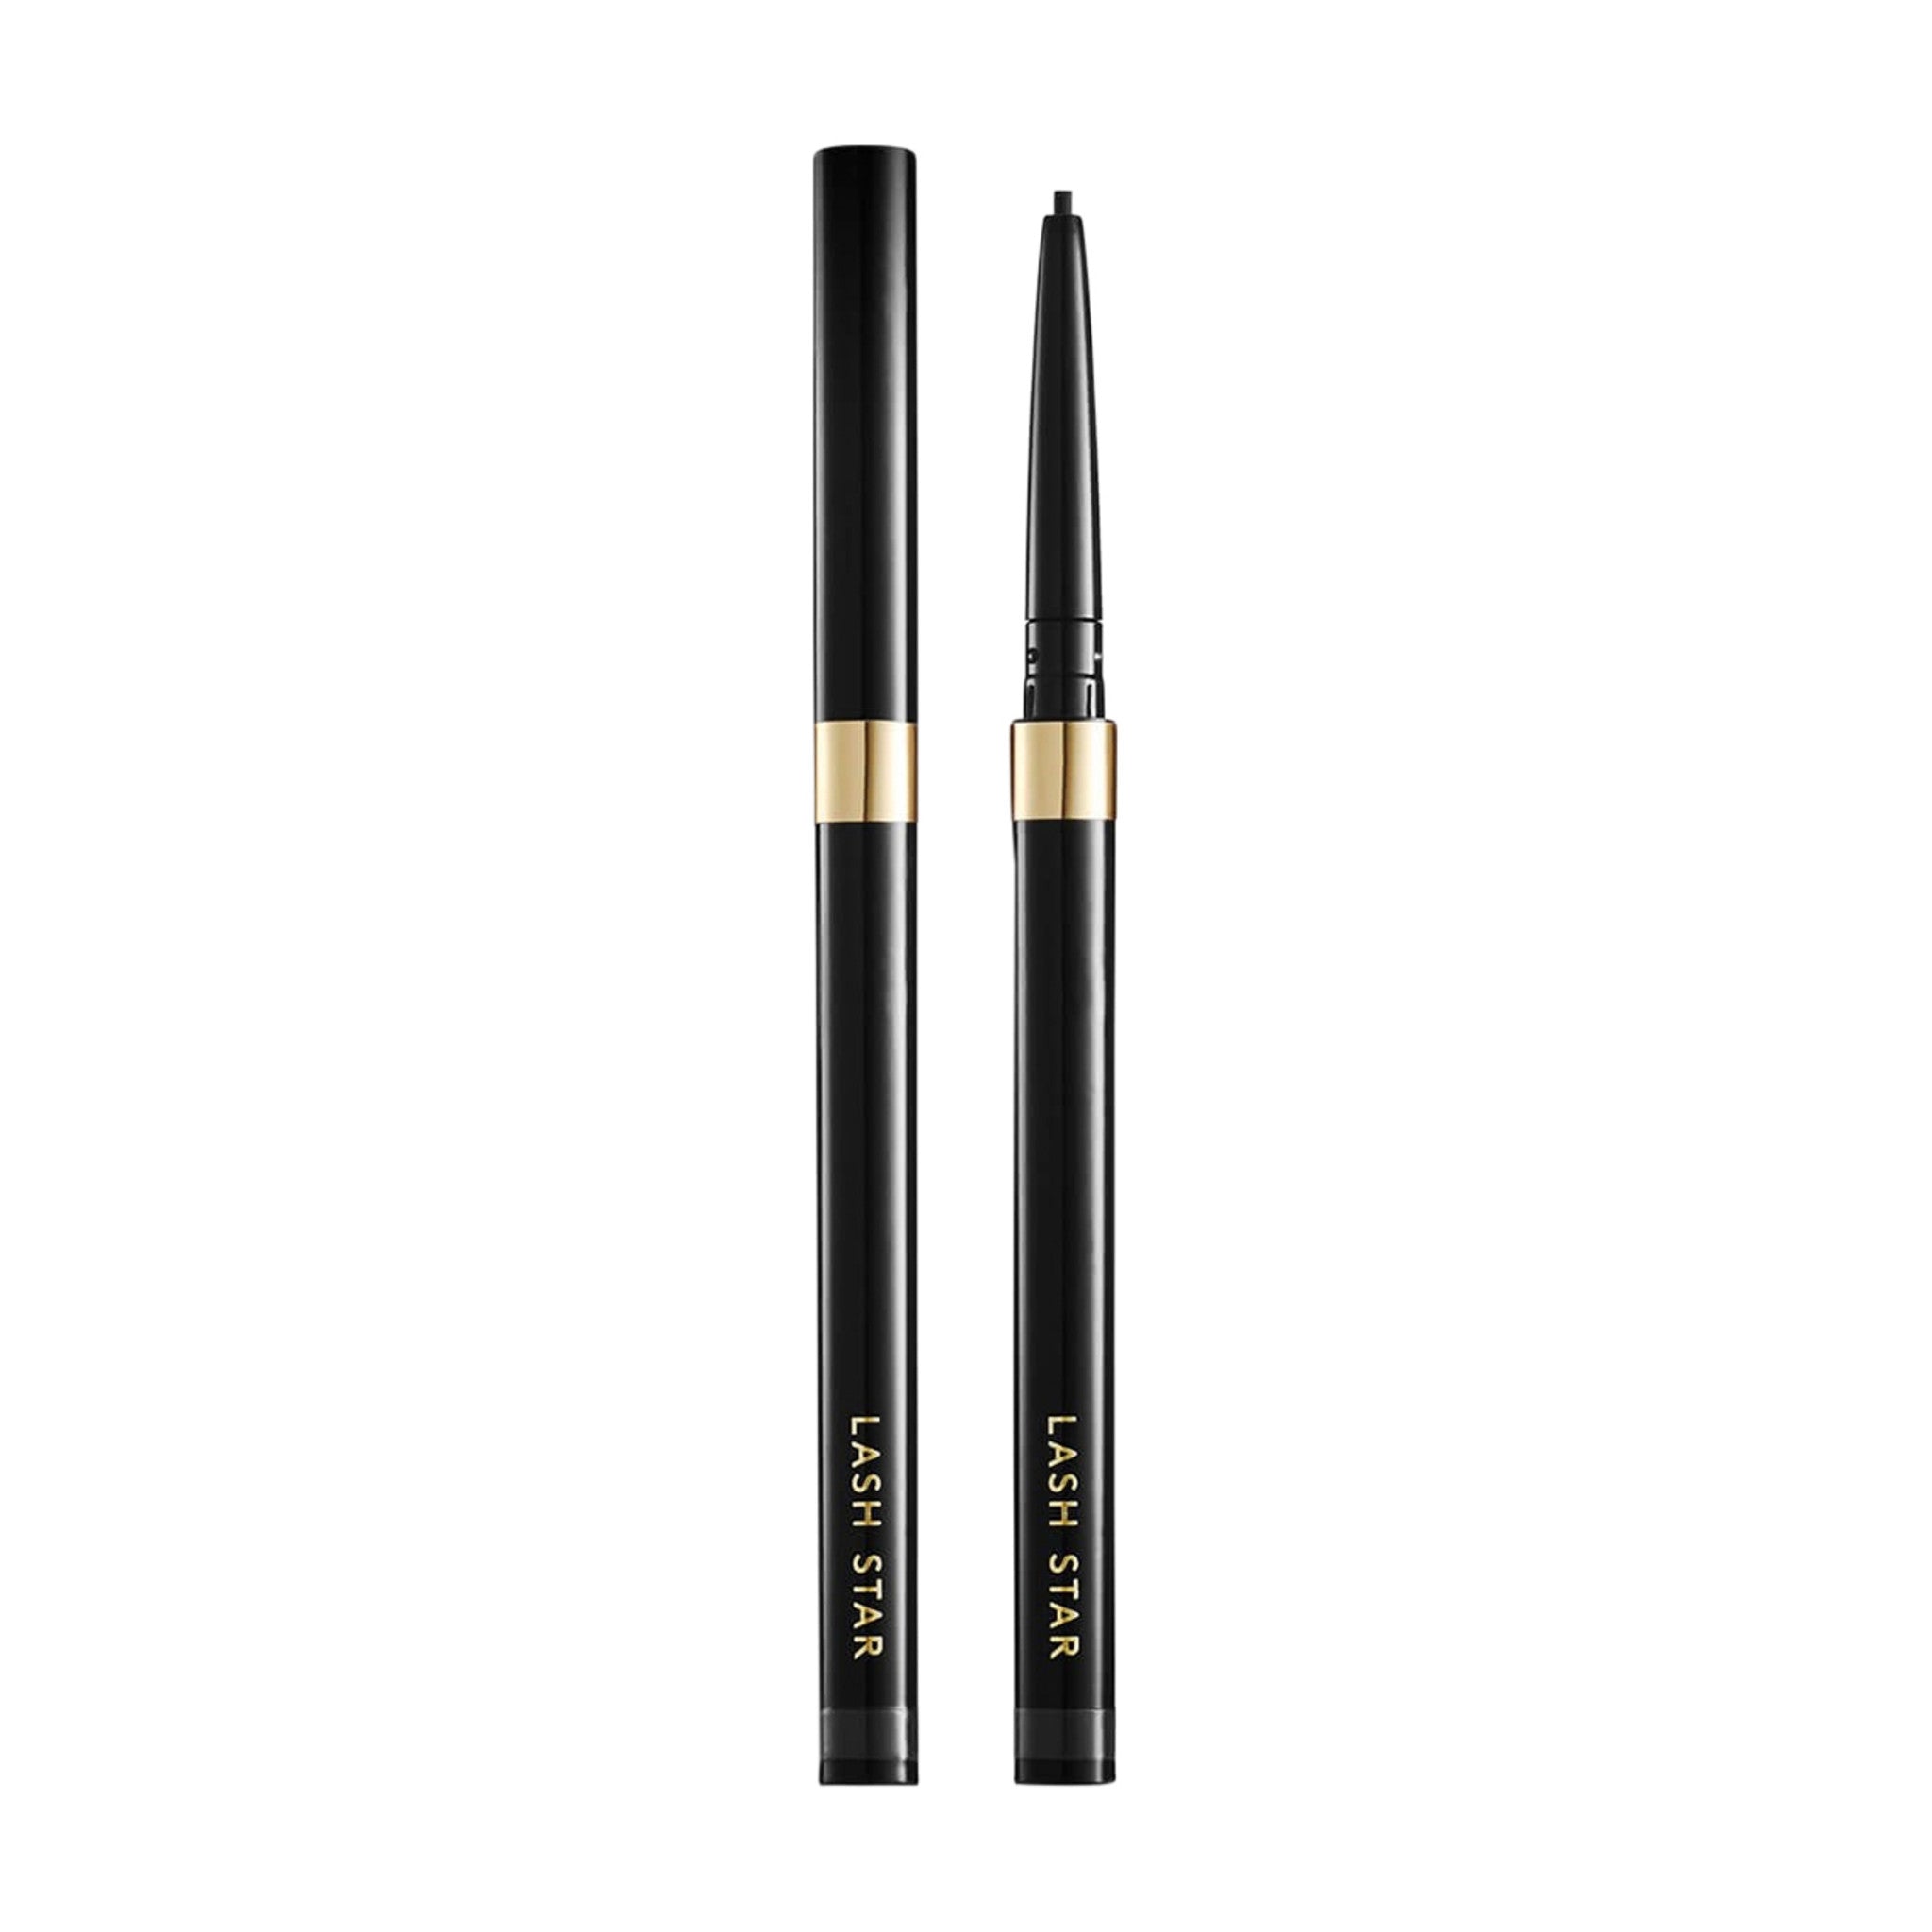 Lash Star Hyper Performance Gel Eye Liner main image. This product is in the color black